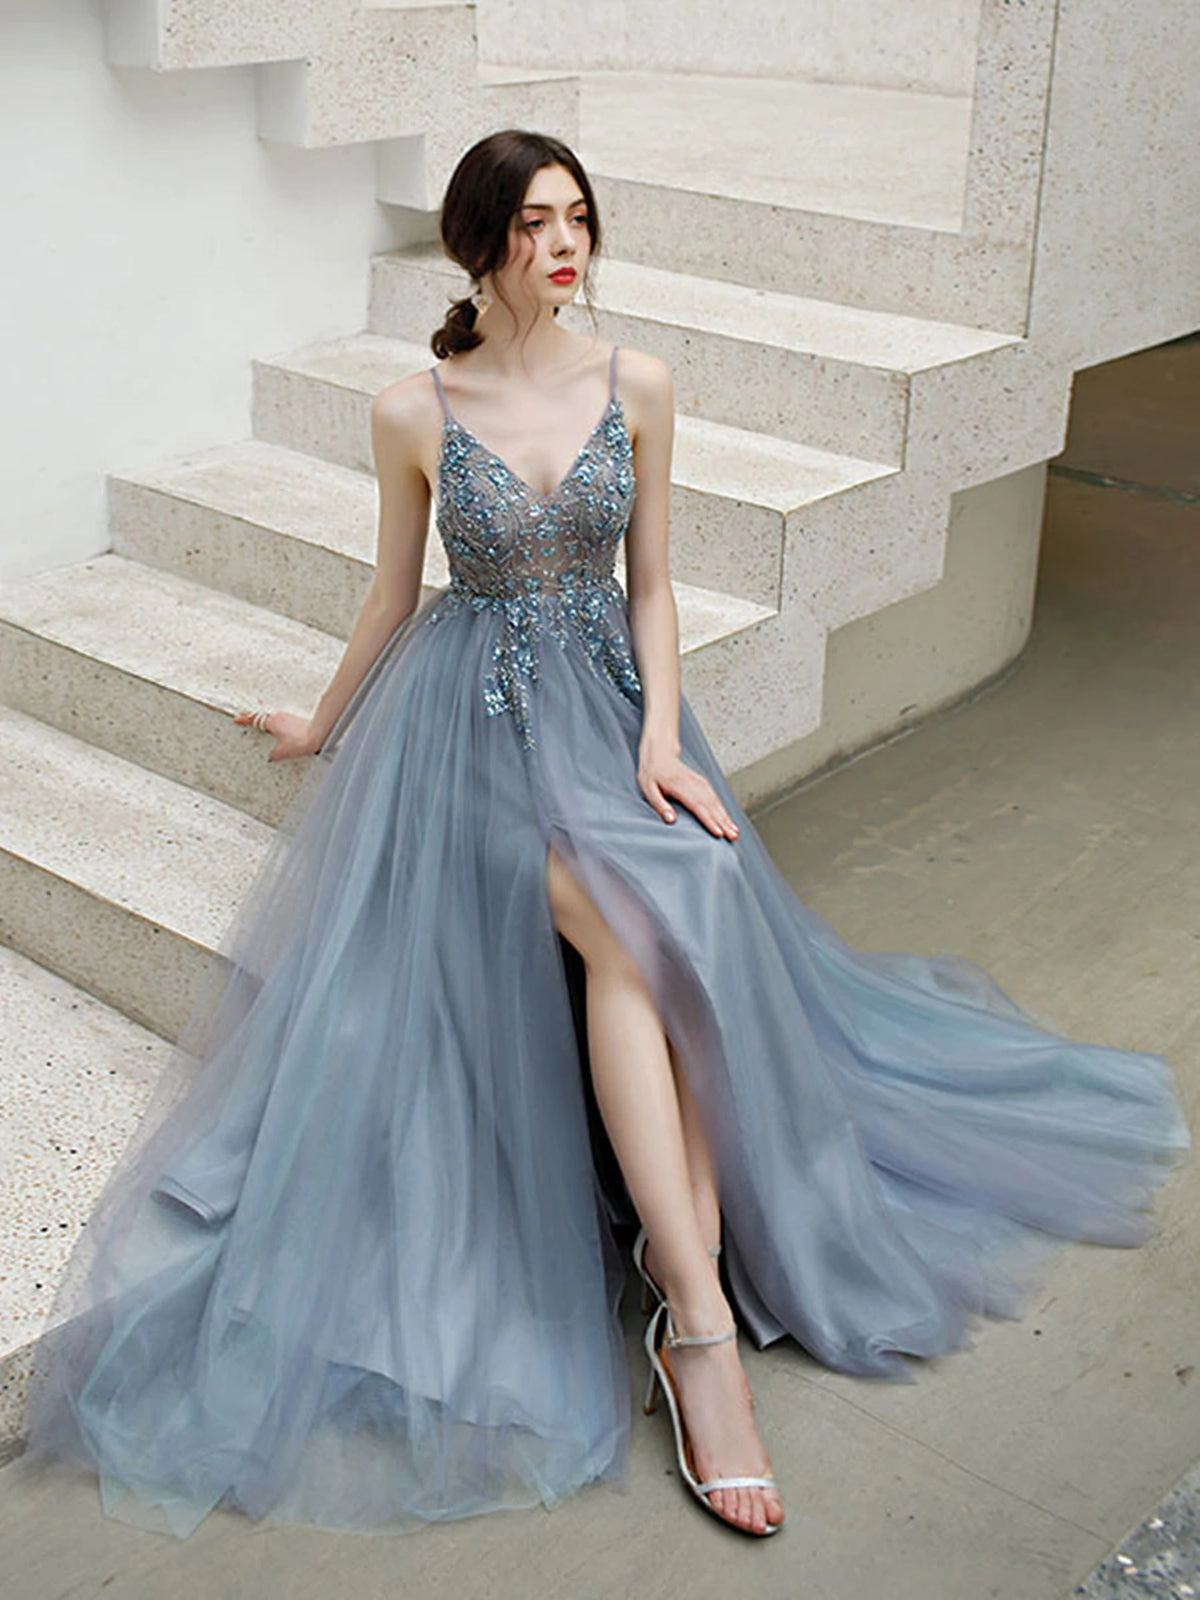 TCR Bluish Grey Mermaid Evening Gown! – TheClothingRental